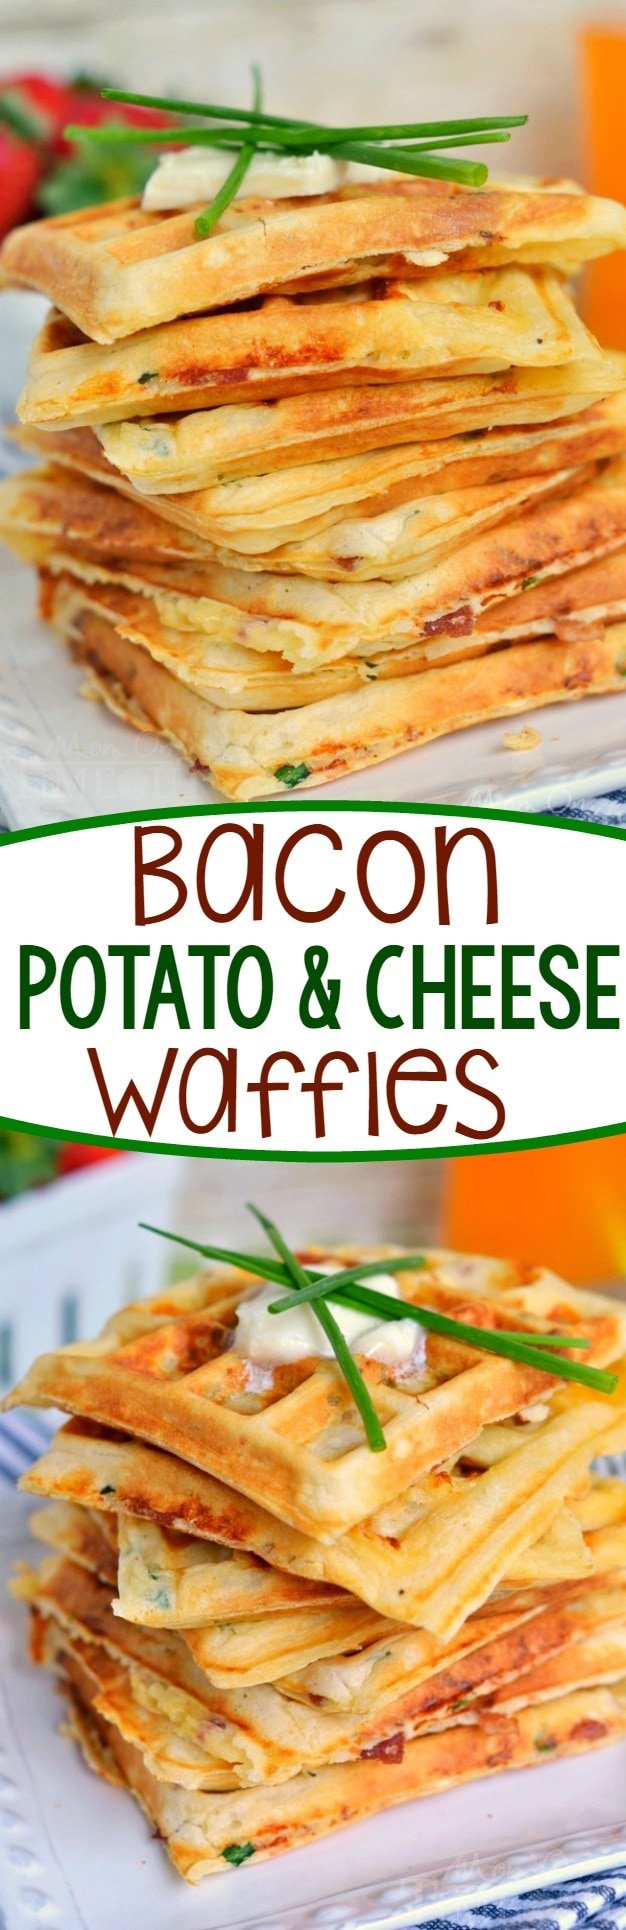 These freezer-friendly Bacon Potato and Cheese Waffles make school mornings just a little bit easier and a lot more yummy! Perfect for breakfast, brunch, or an after school snack!